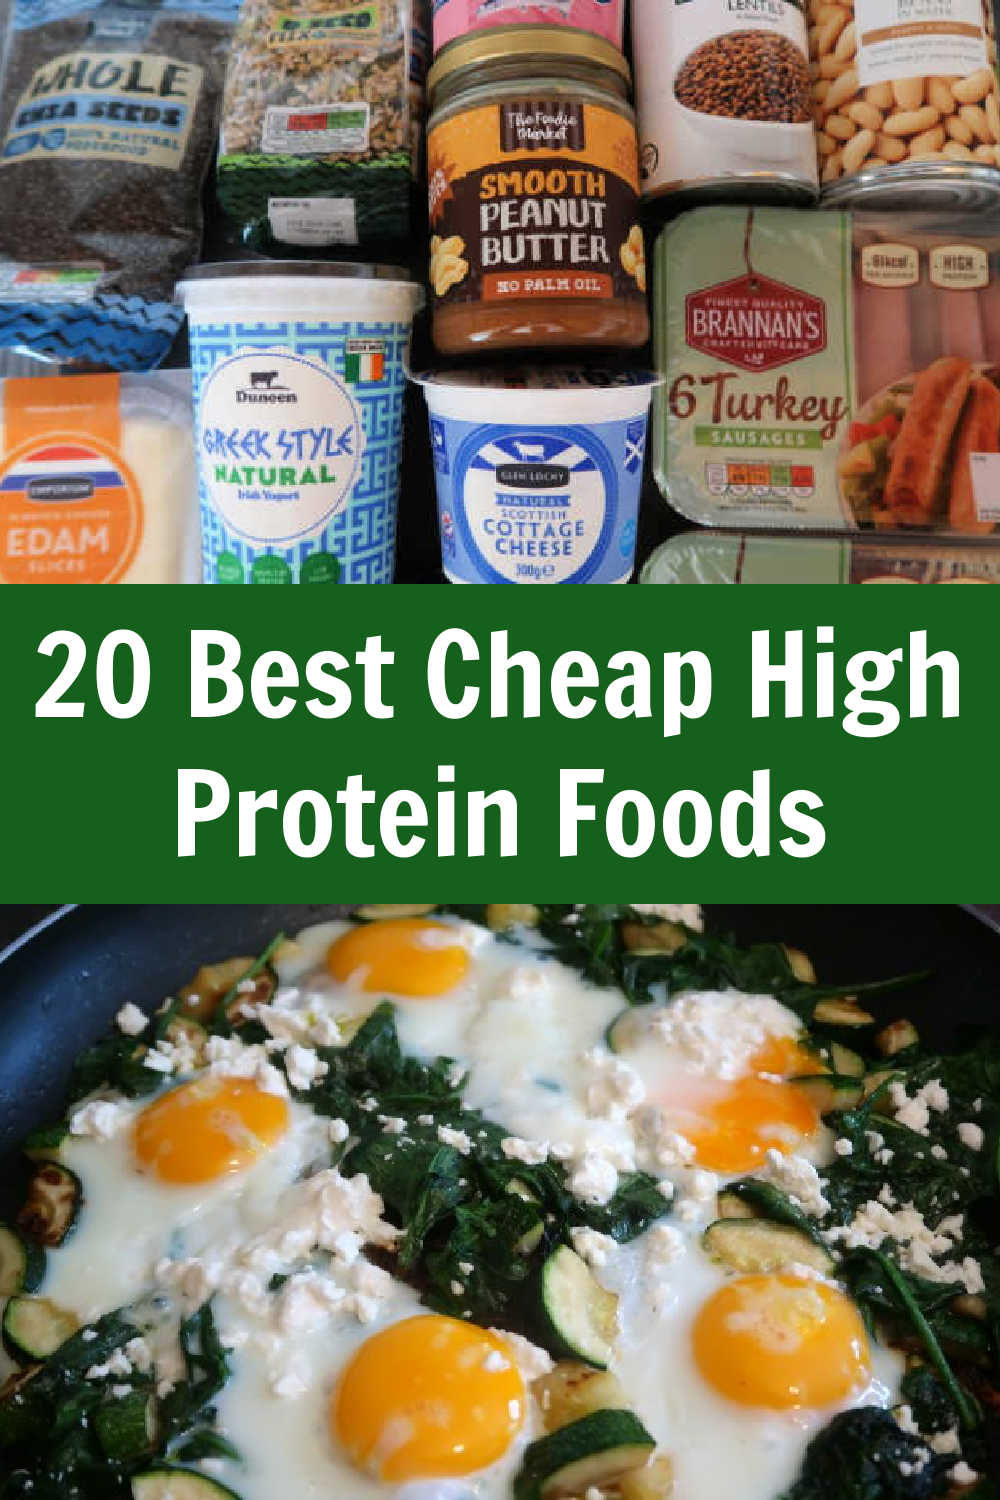 20 Cheap High Protein Foods – The best cheapest healthy high-protein food sources on a budget – with a video of budget-friendly food and meal ideas.